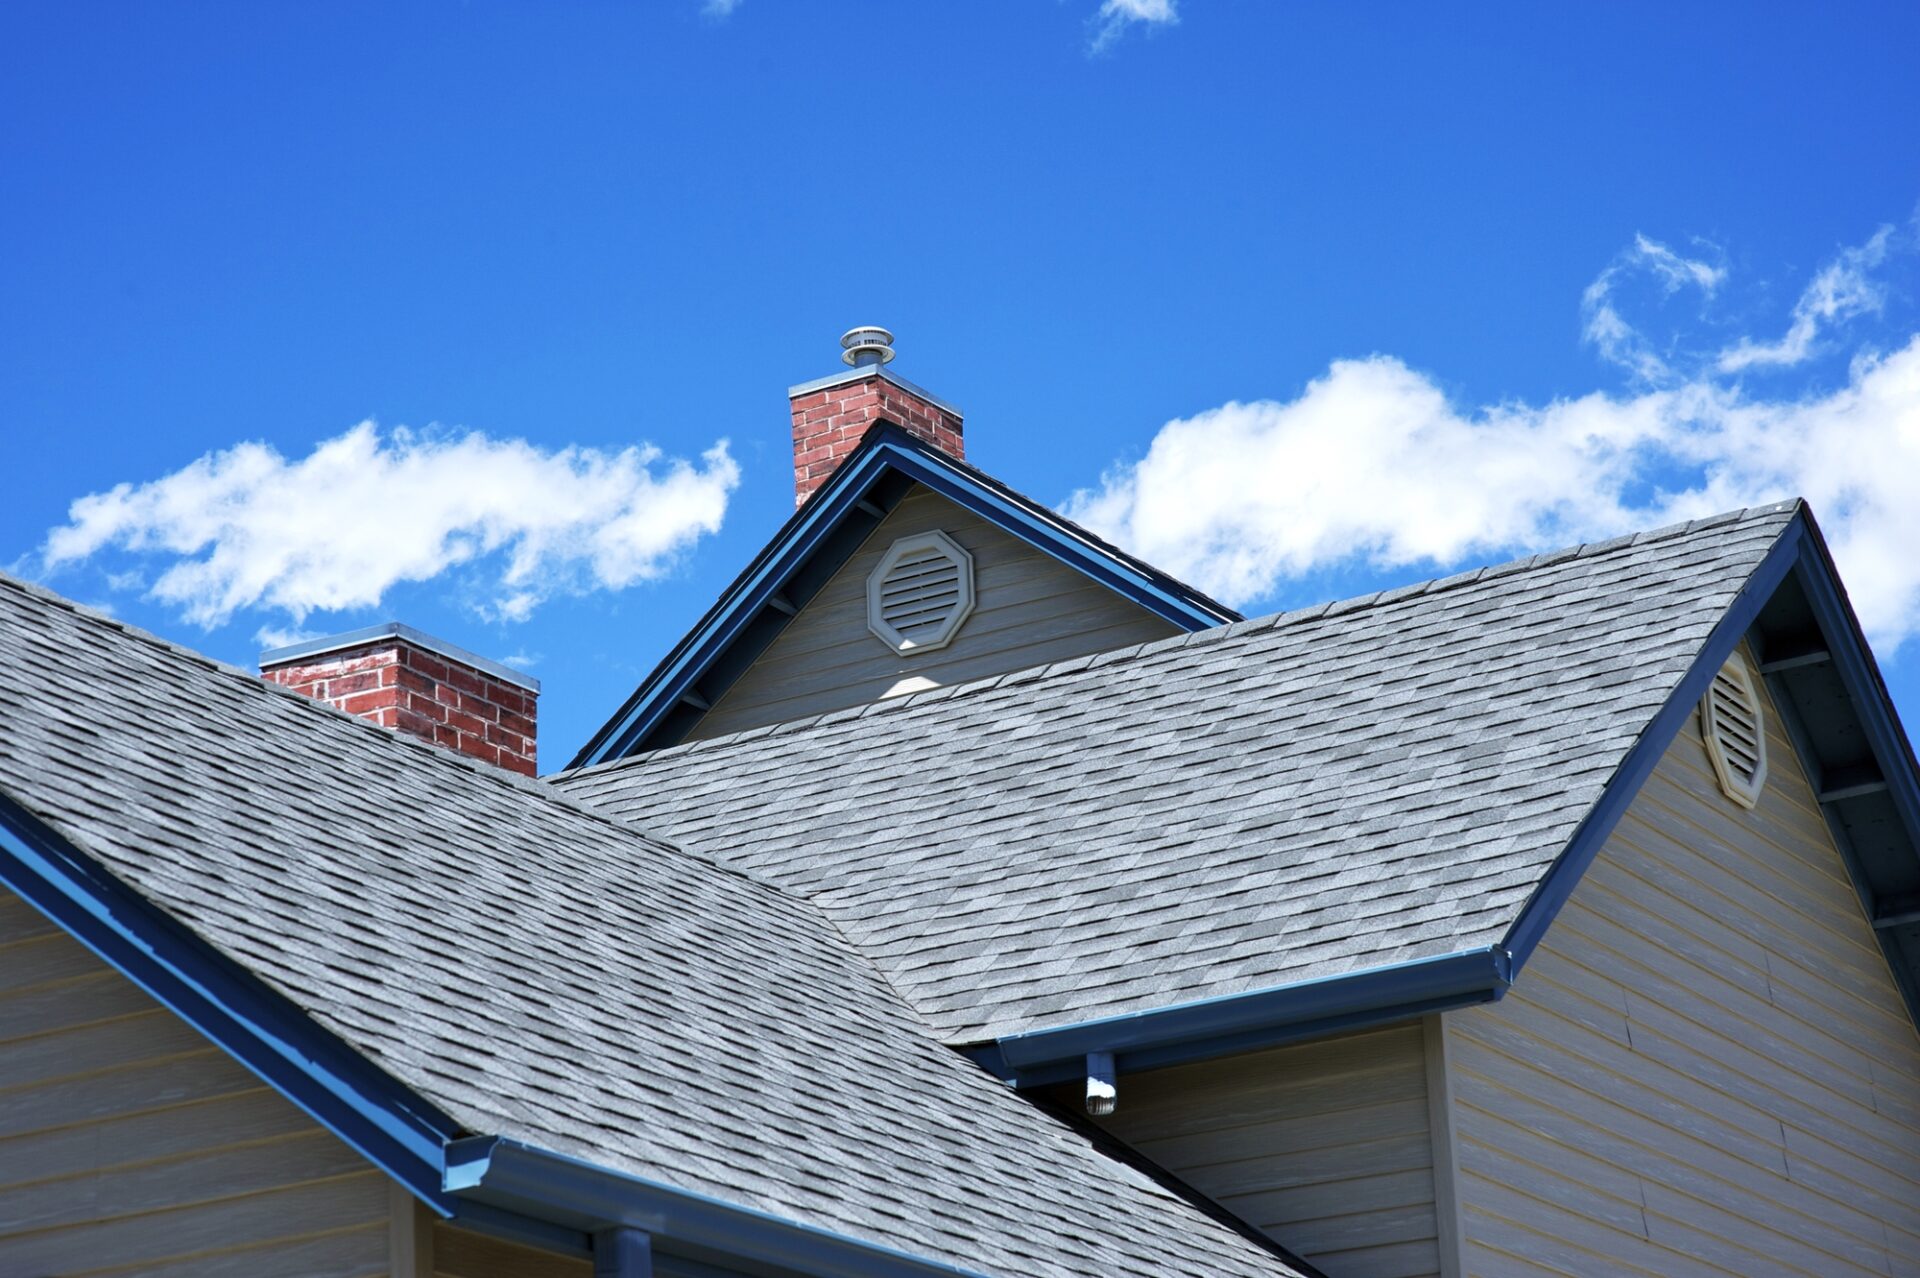 House Roof - Roofing Works. Cloudy Blue Sky. American Building Style.